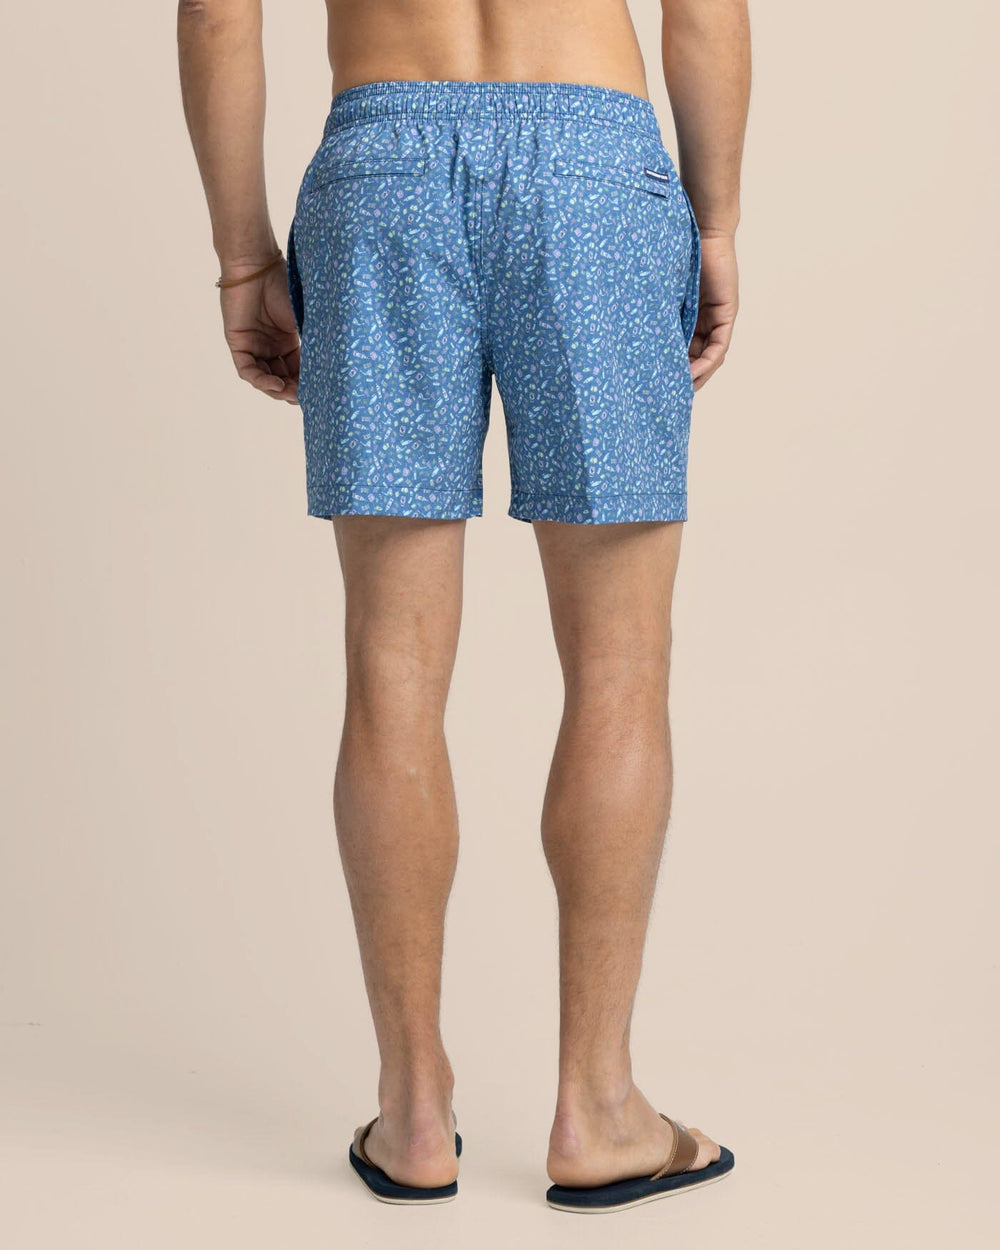 The back view of the Southern Tide Dazed and Transfused Swim Trunk by Southern Tide - Coronet Blue